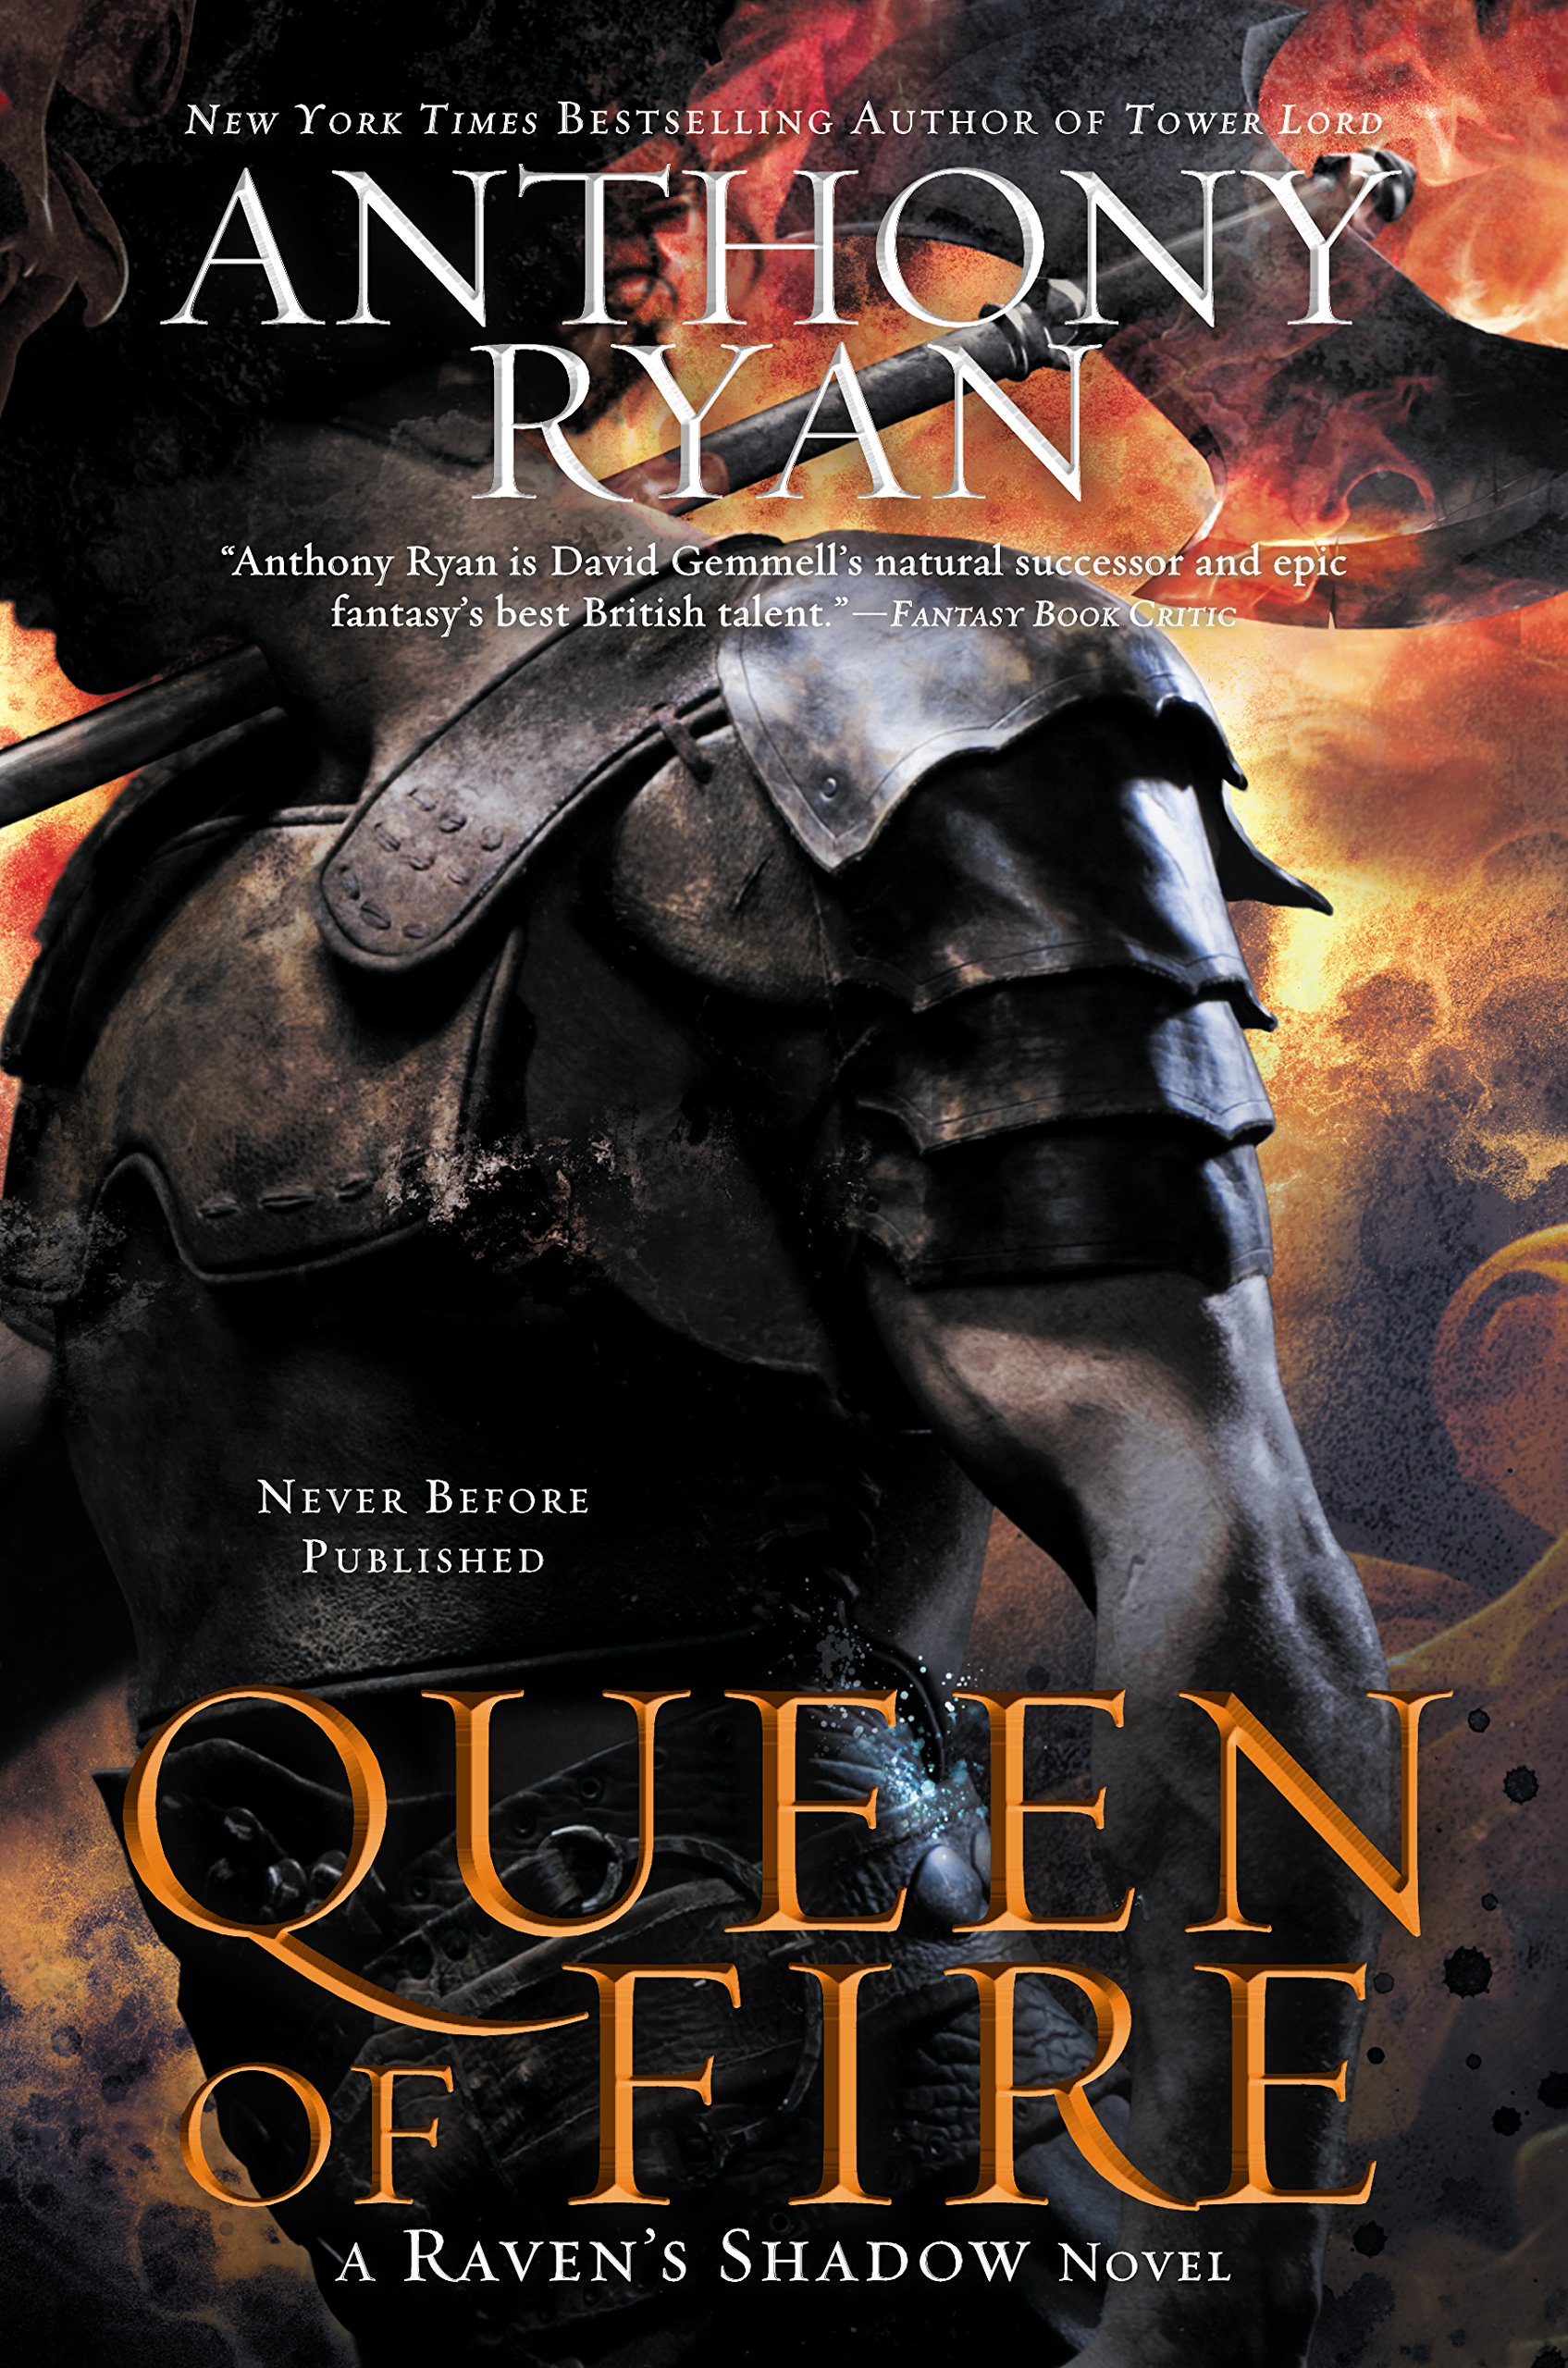 http://vignette2.wikia.nocookie.net/beralshakur/images/a/ad/Queen_of_Fire_(US_Cover).jpg/revision/latest?cb=20150212033645